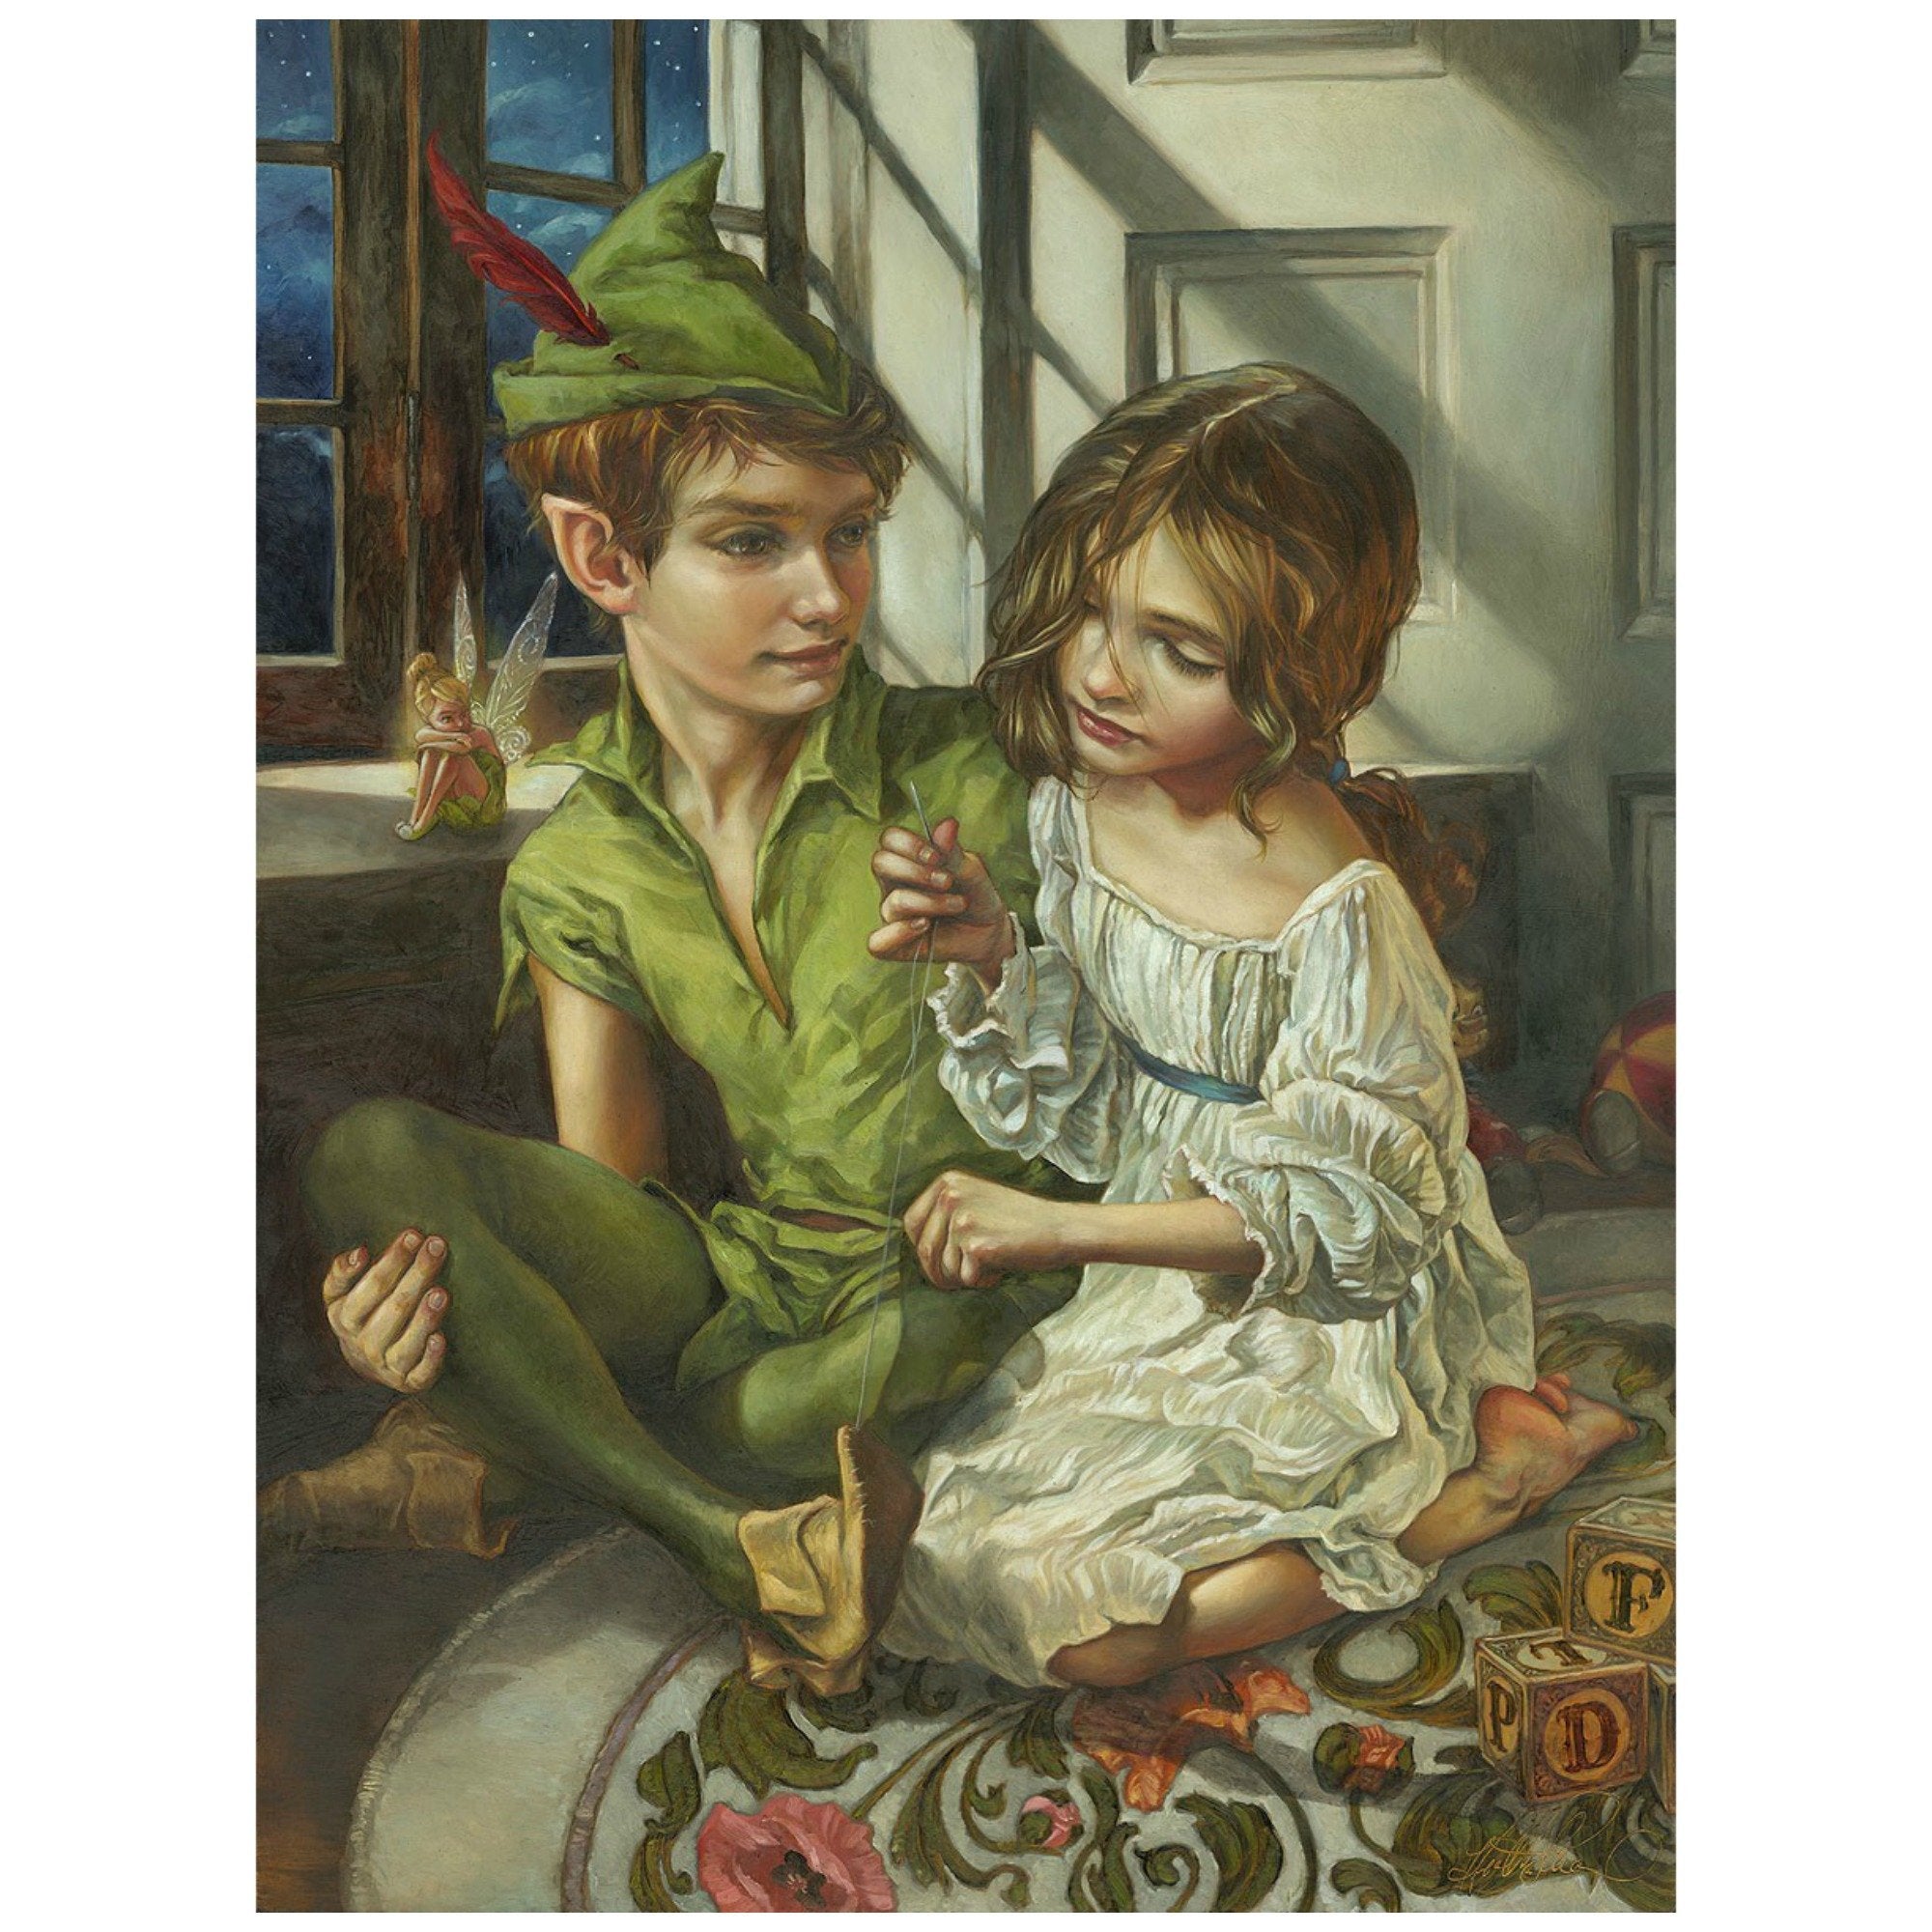 A portrait of Peter Pan and Wendy sit in her room by Heather Edwards